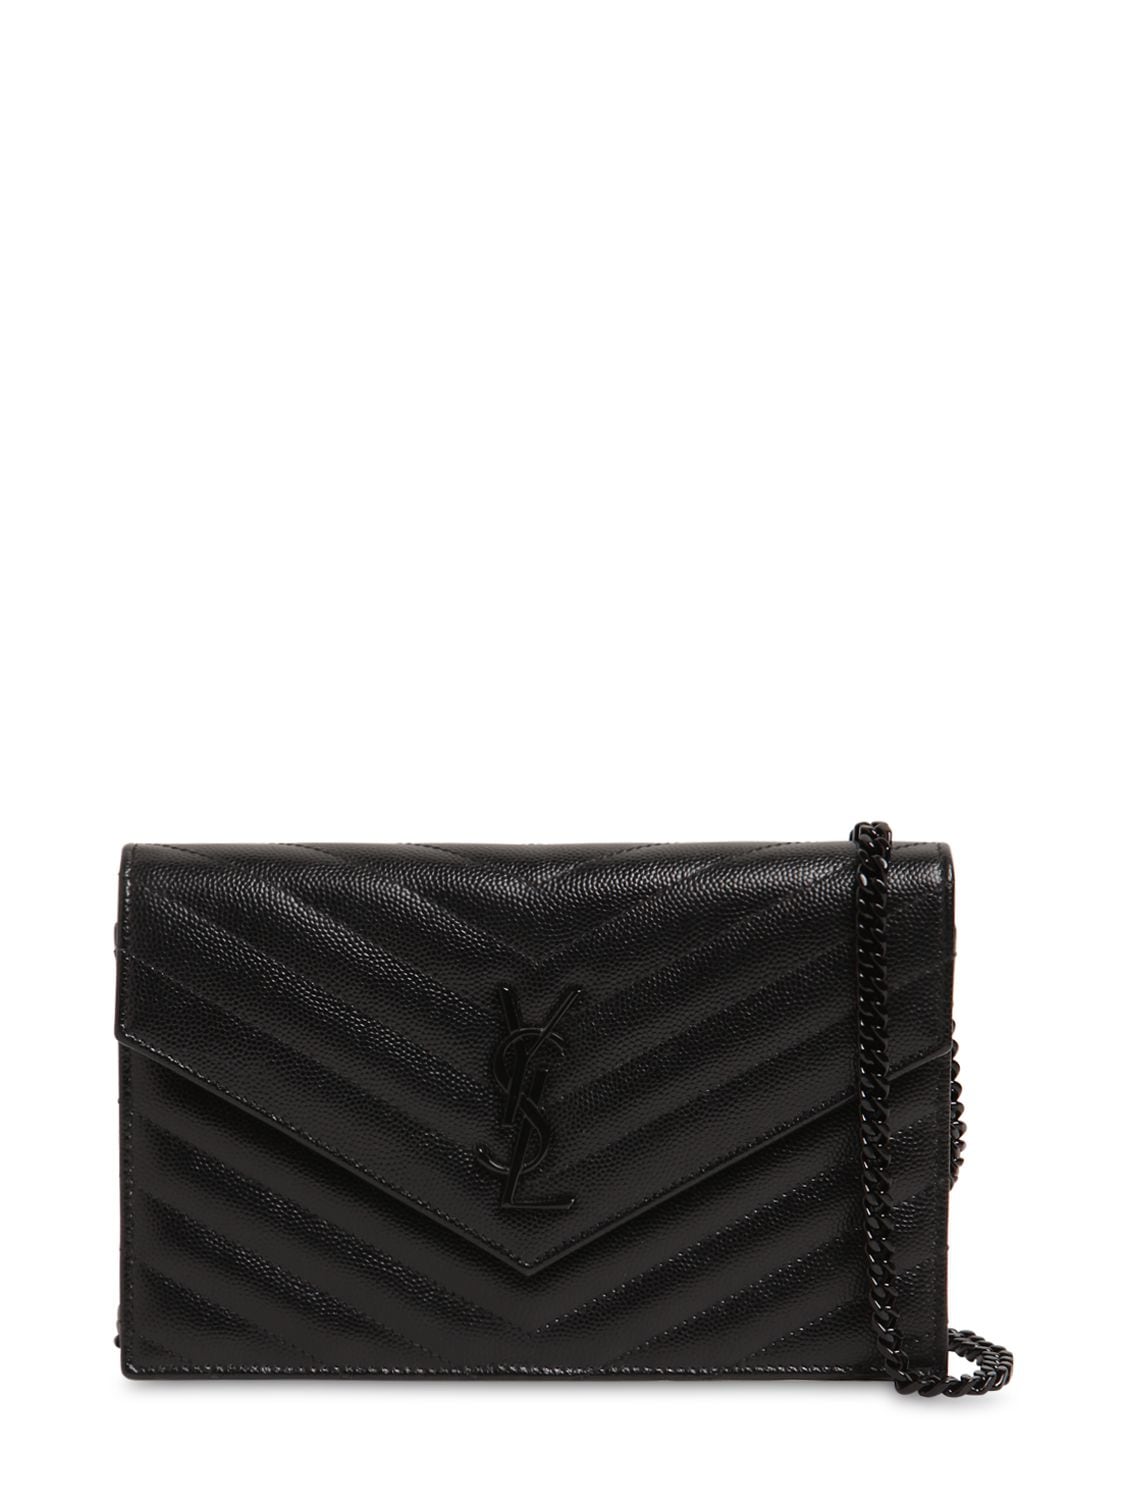 Image of Small Monogram Quilted Leather Bag